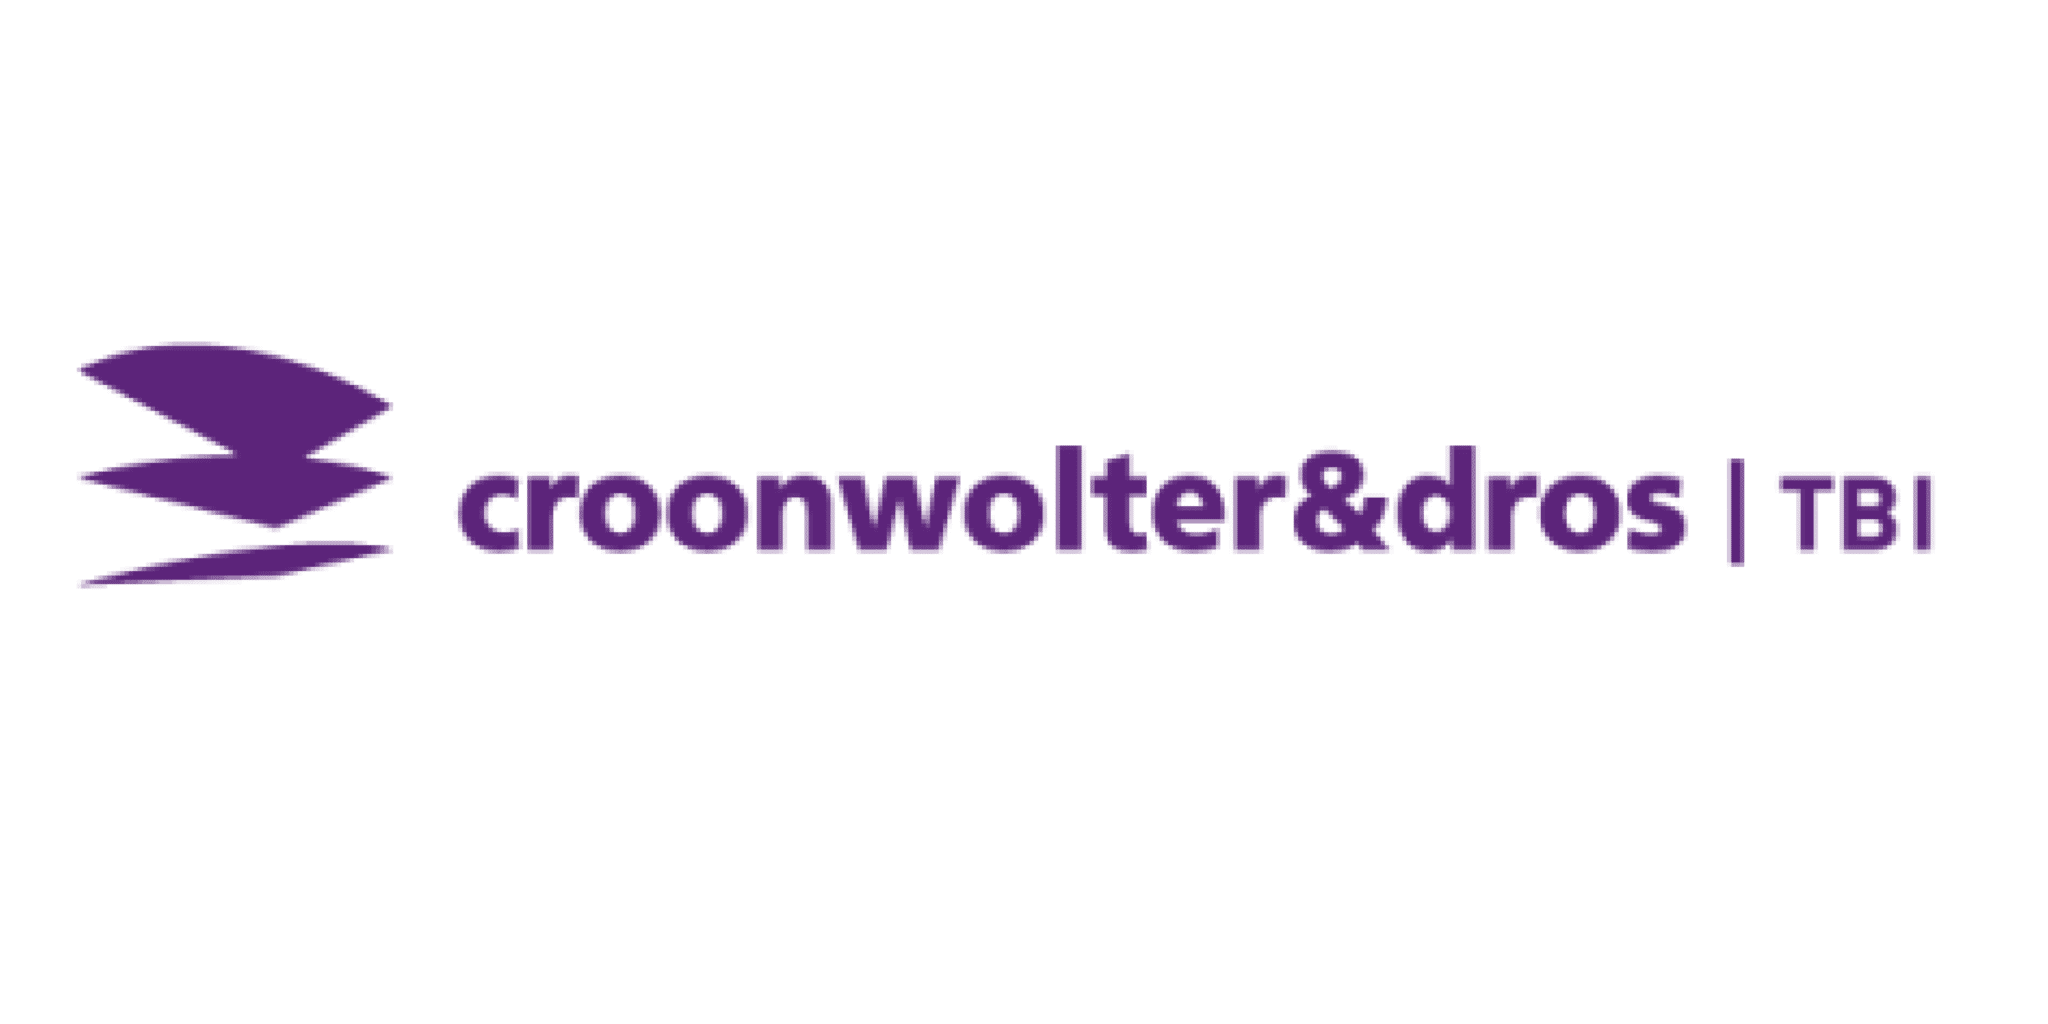 Croonwolter&#038;dros